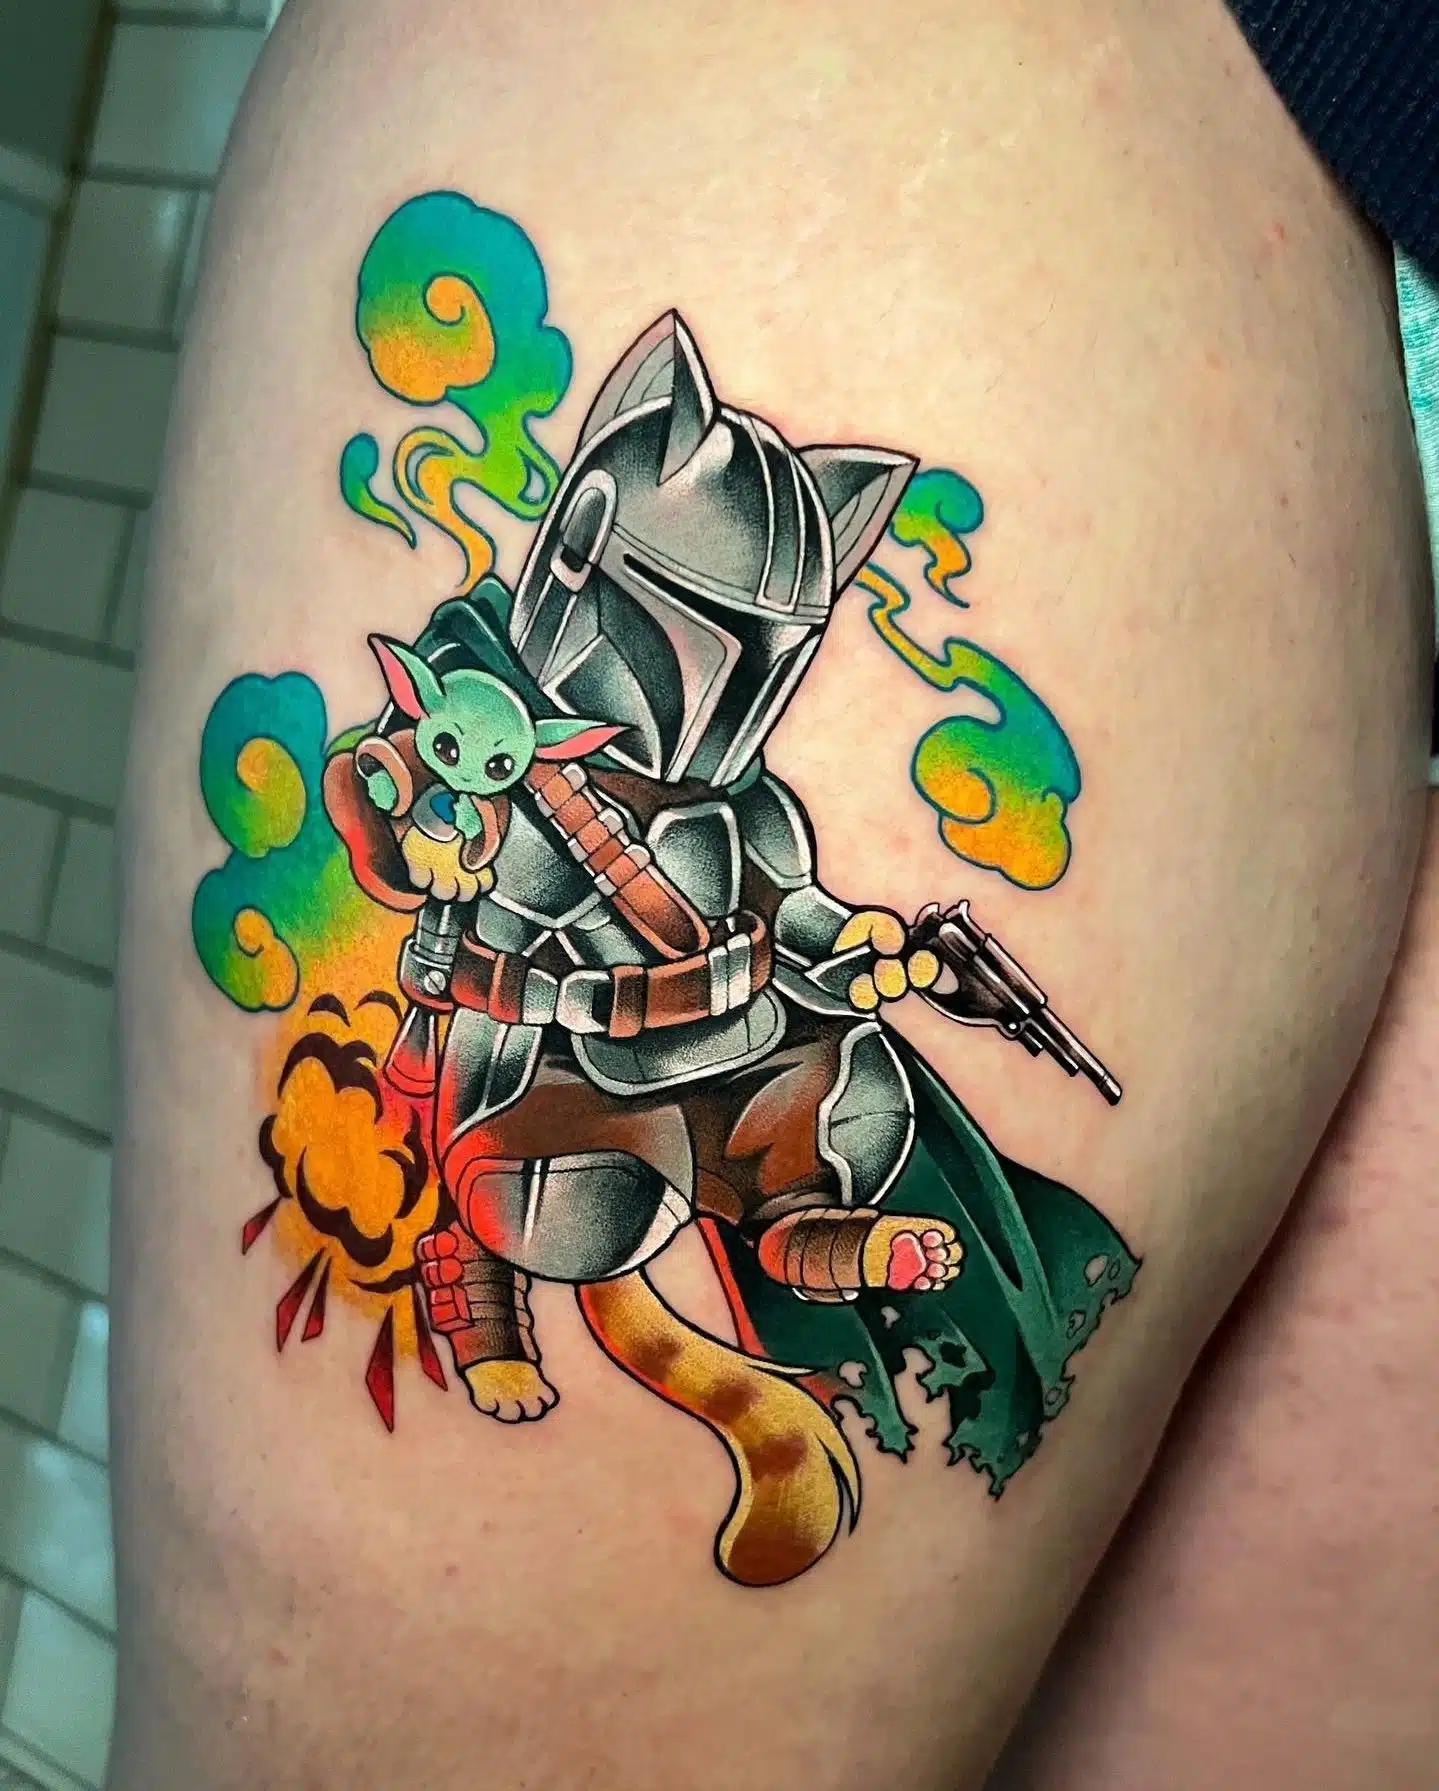 This is the way. 
Incredible Meowdalorian (Pedro Pascat) and Grogu piece by the Queen of Cute Nat!
naaat.j 

Supplies from our sponsors:
magnumtattoosupplies.uk
And made using products from our sponsors:
yayofamilia

                 